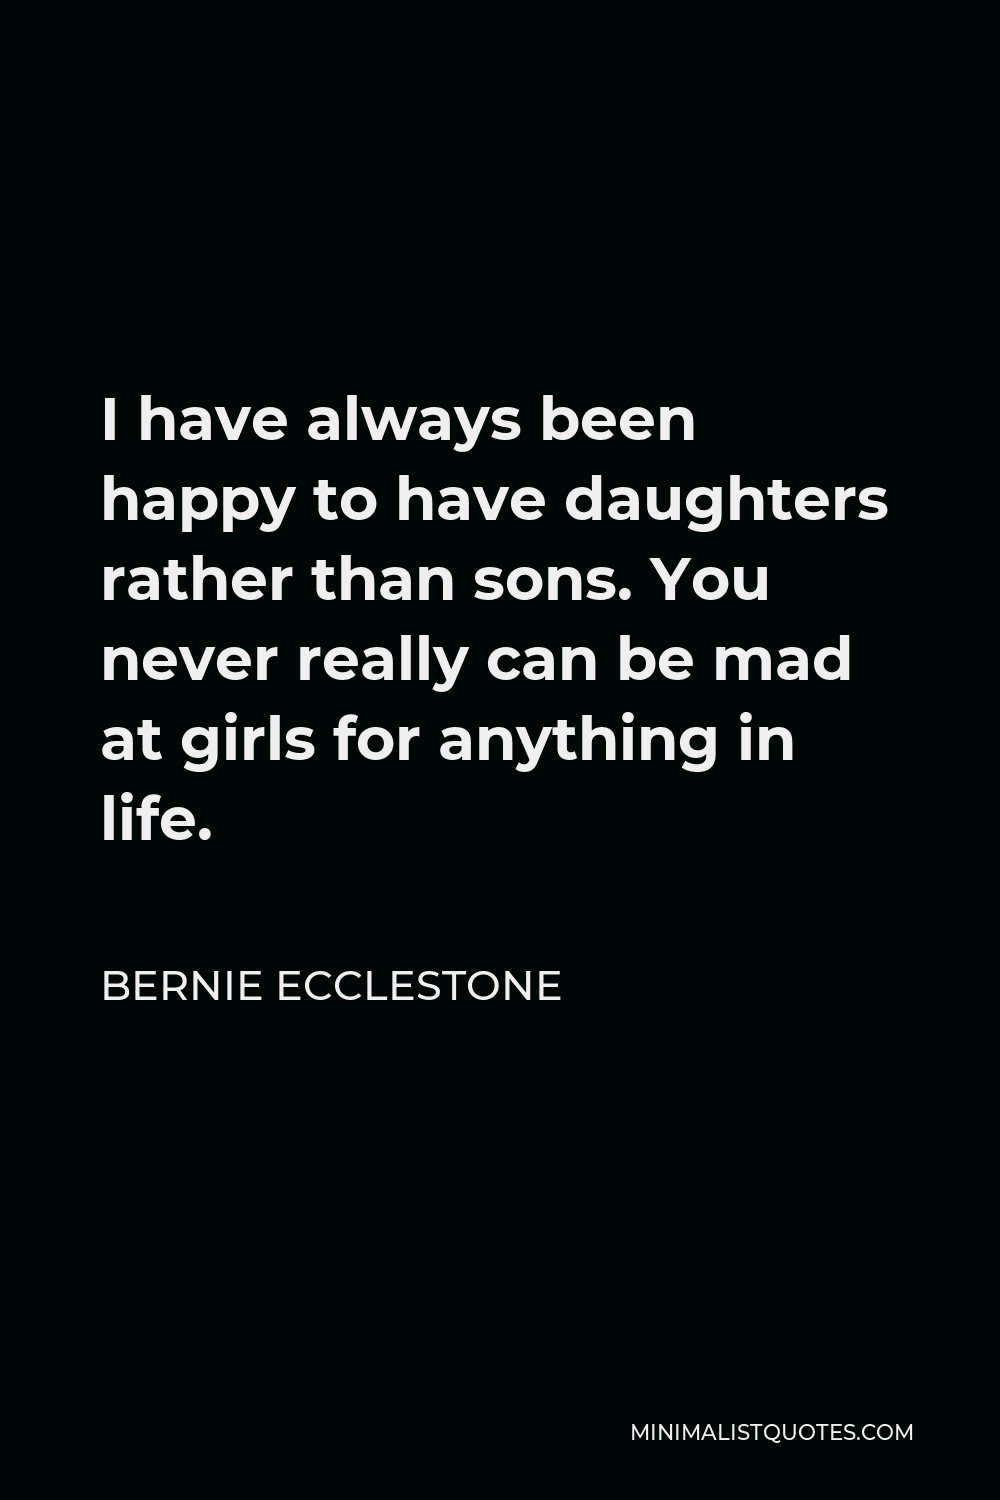 Bernie Ecclestone Quote - I have always been happy to have daughters rather than sons. You never really can be mad at girls for anything in life.